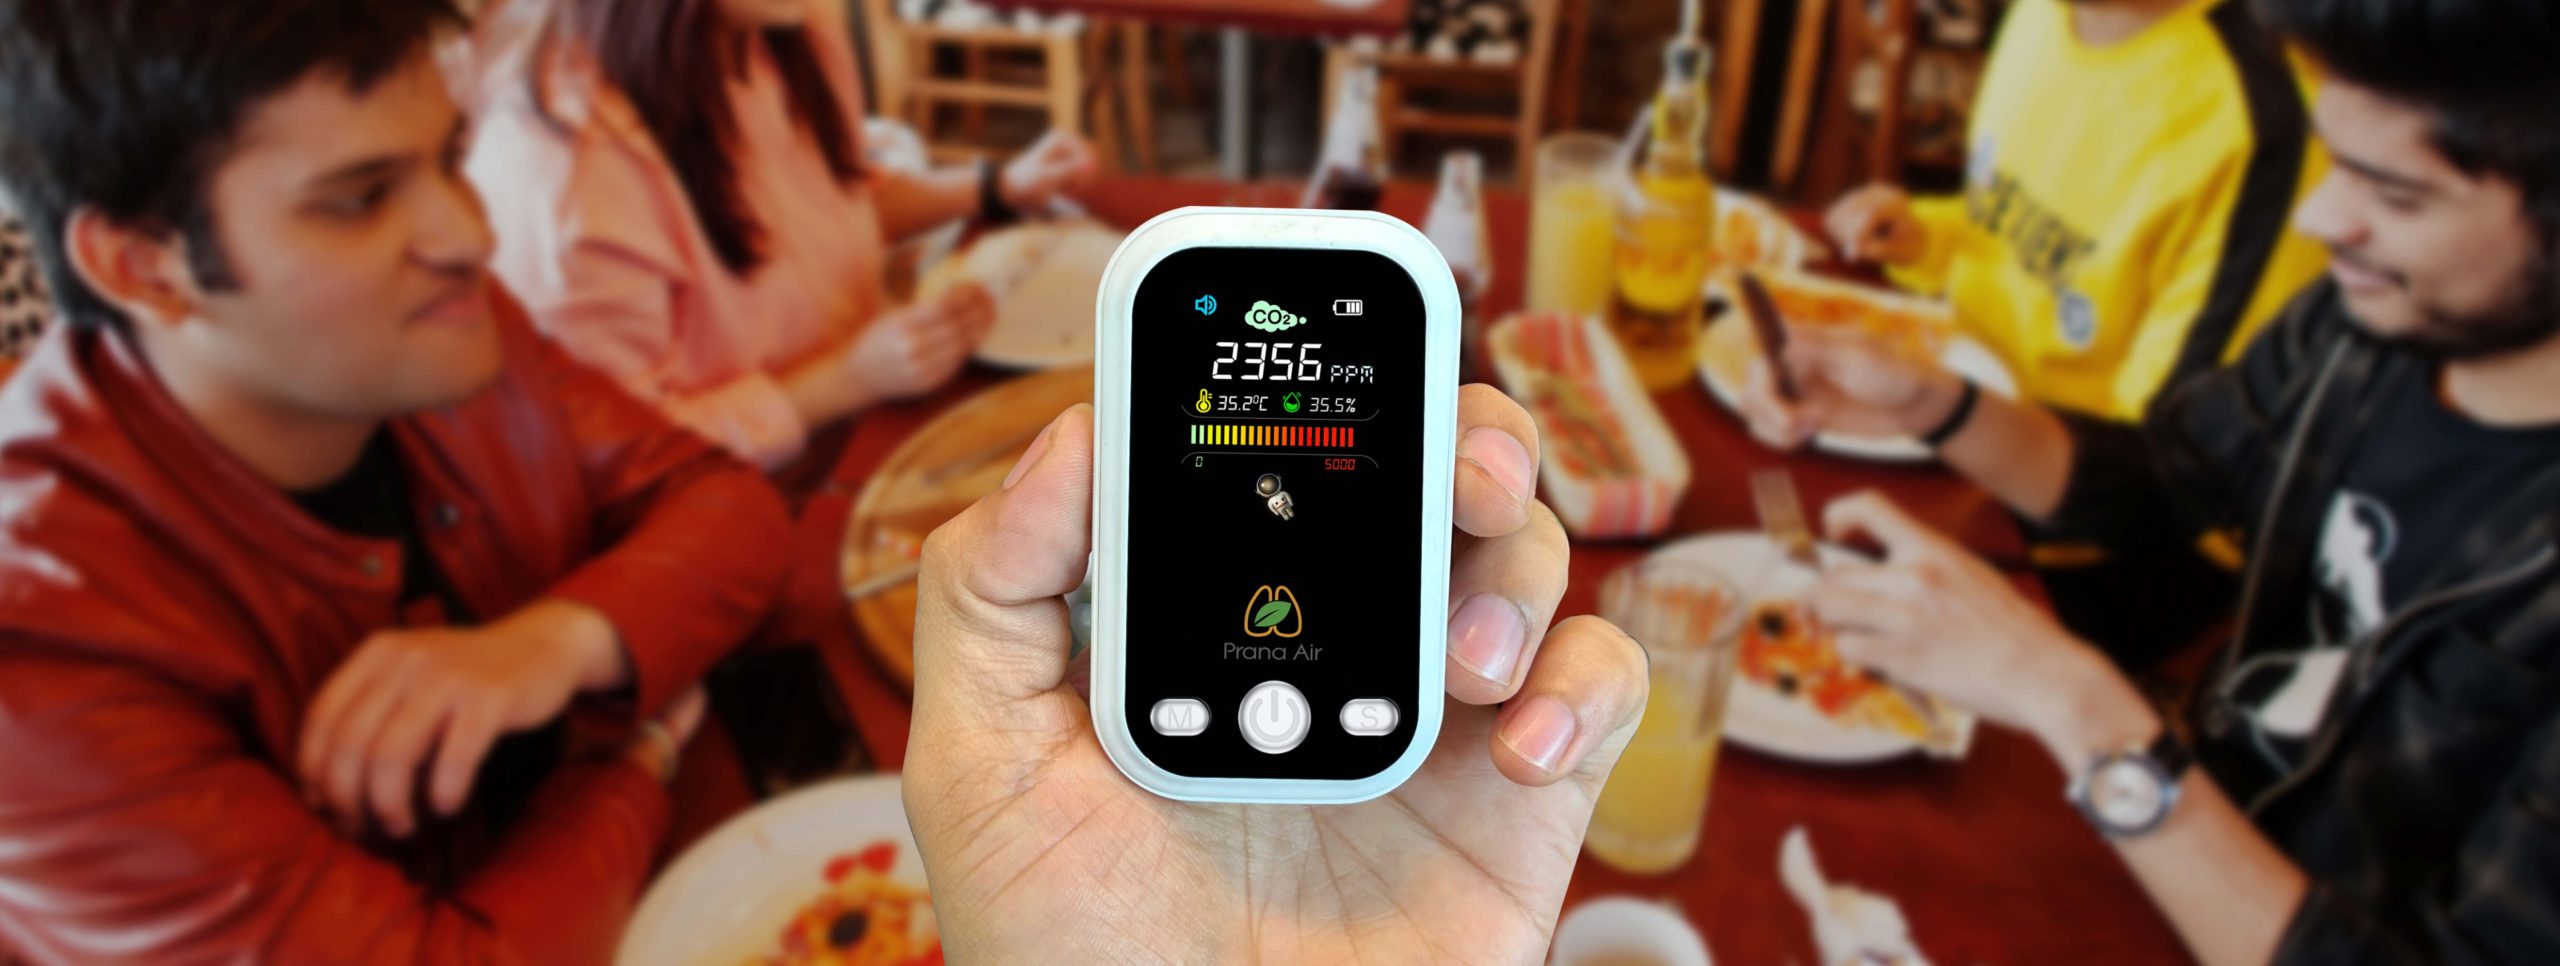 monitoring real-time co2 gas level in restaurant